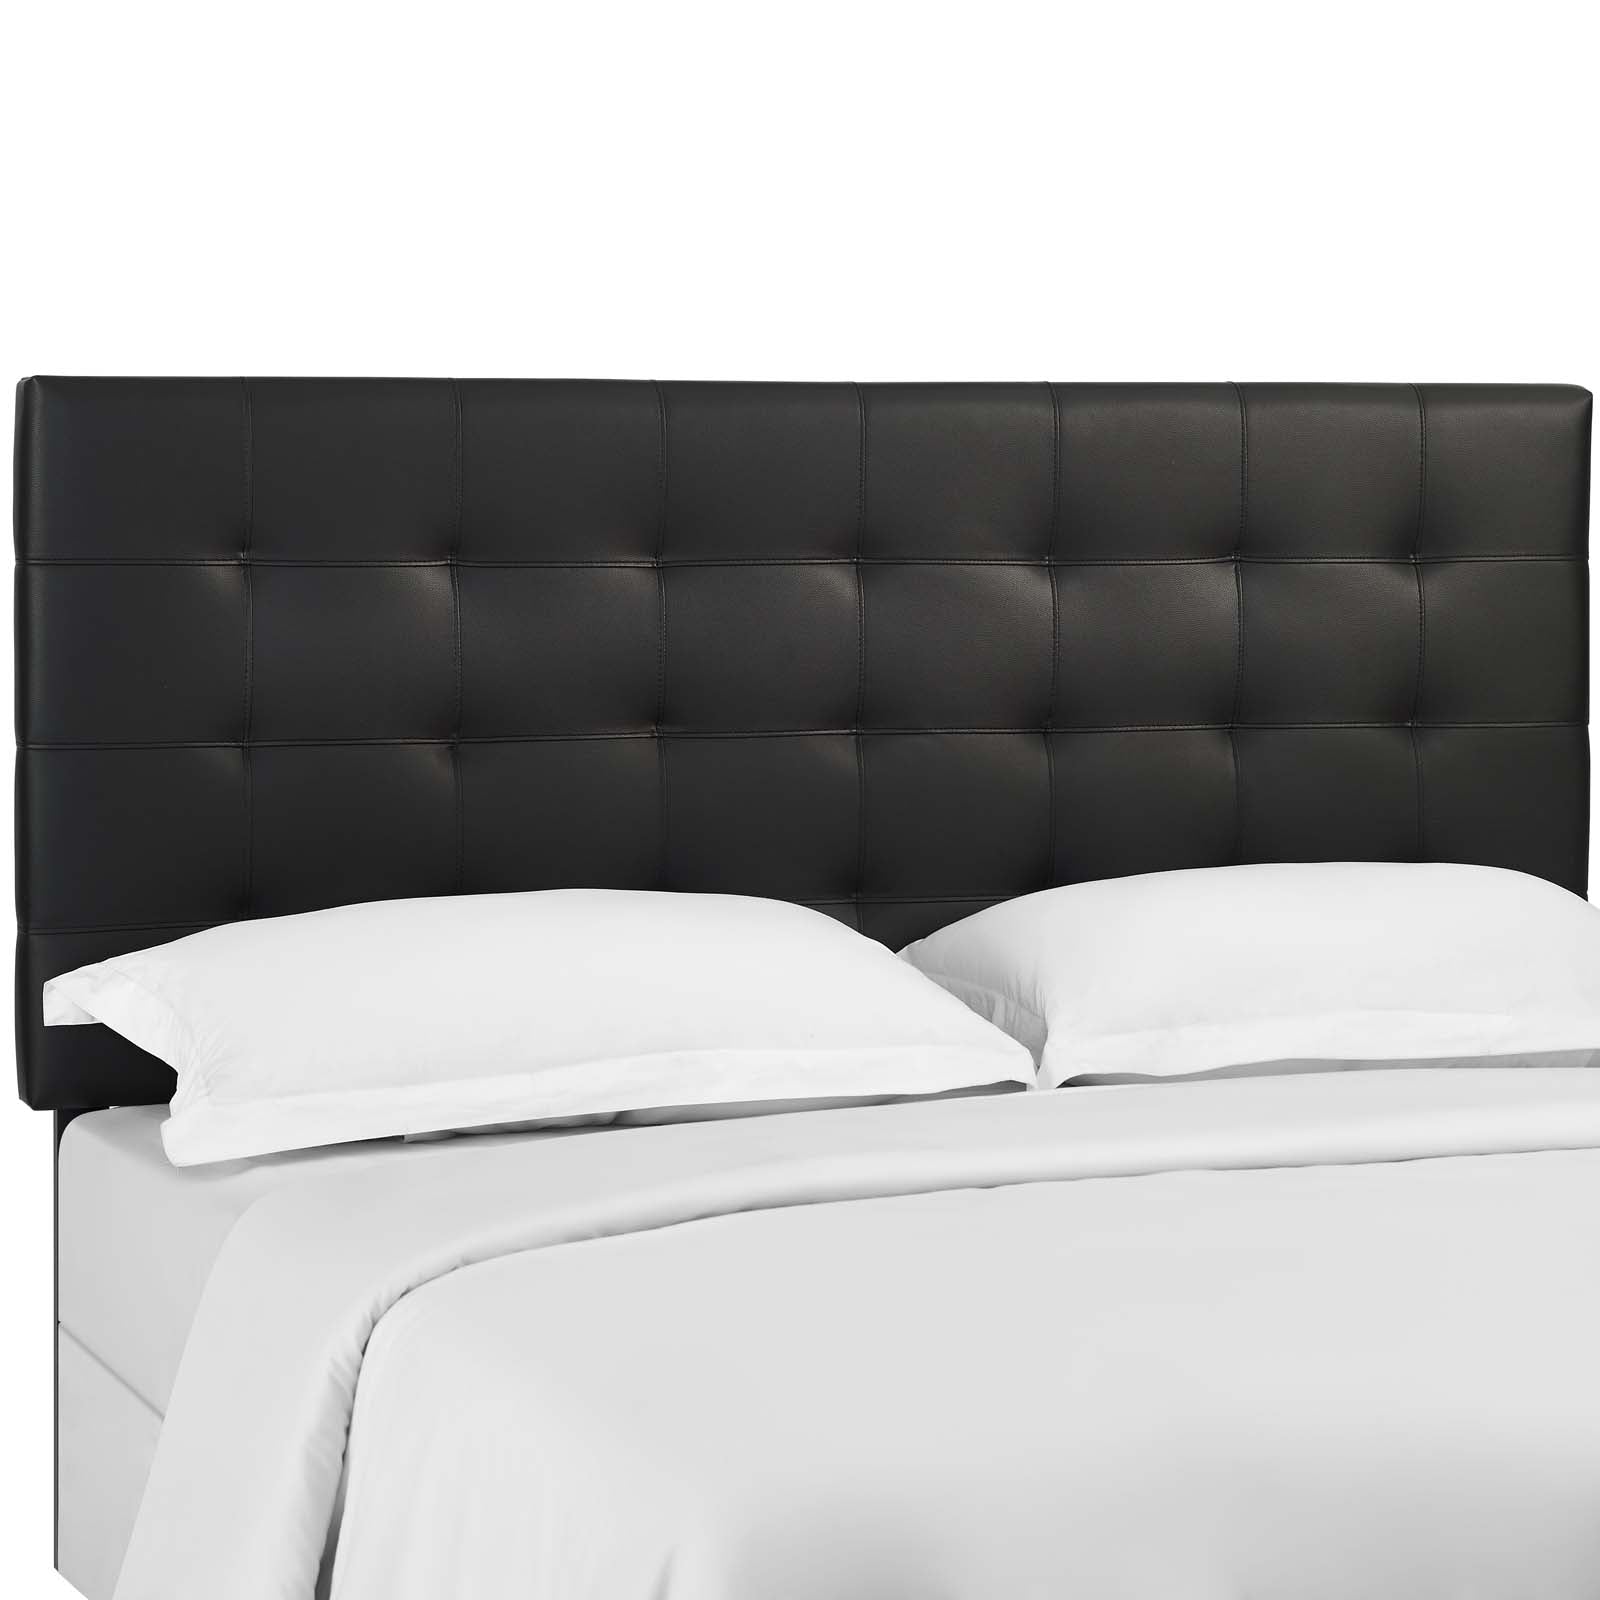 Paisley Tufted King and California King Upholstered Faux Leather Headboard - East Shore Modern Home Furnishings